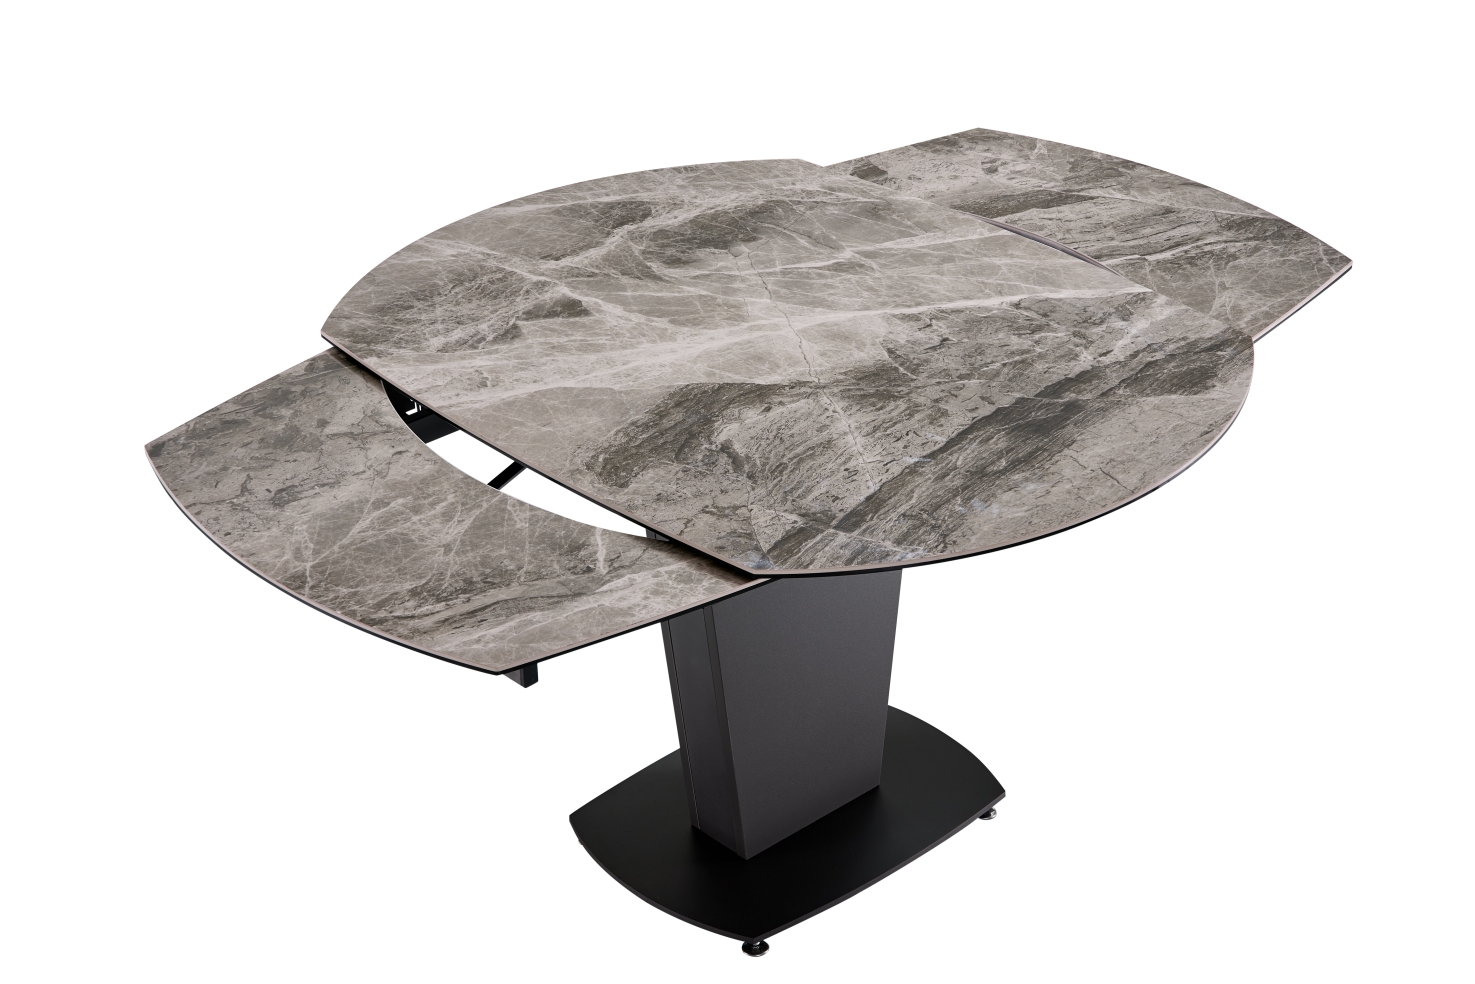 Overnice Marble Designer Table and Chairs Set